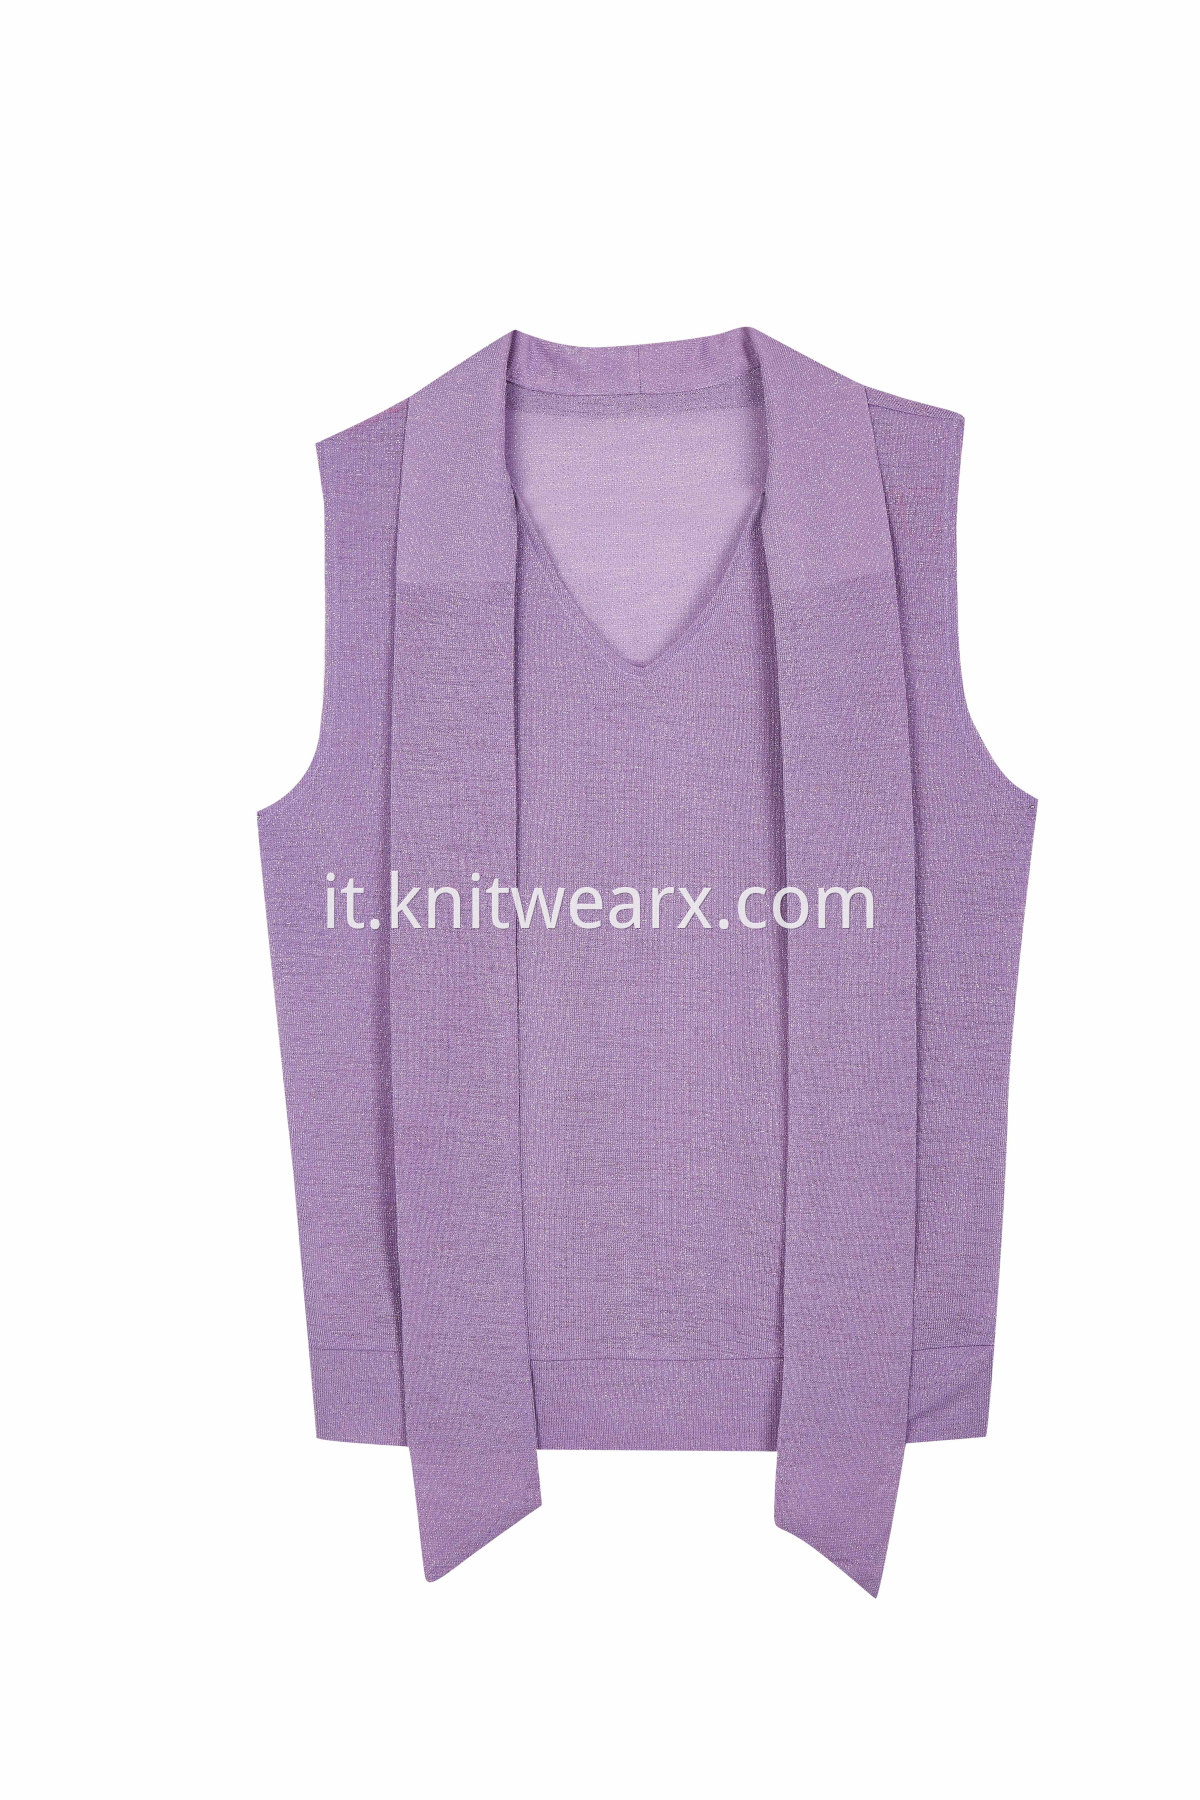 Women's Sleeveless Vneck Lapel Knitted Fabric Pullover Top